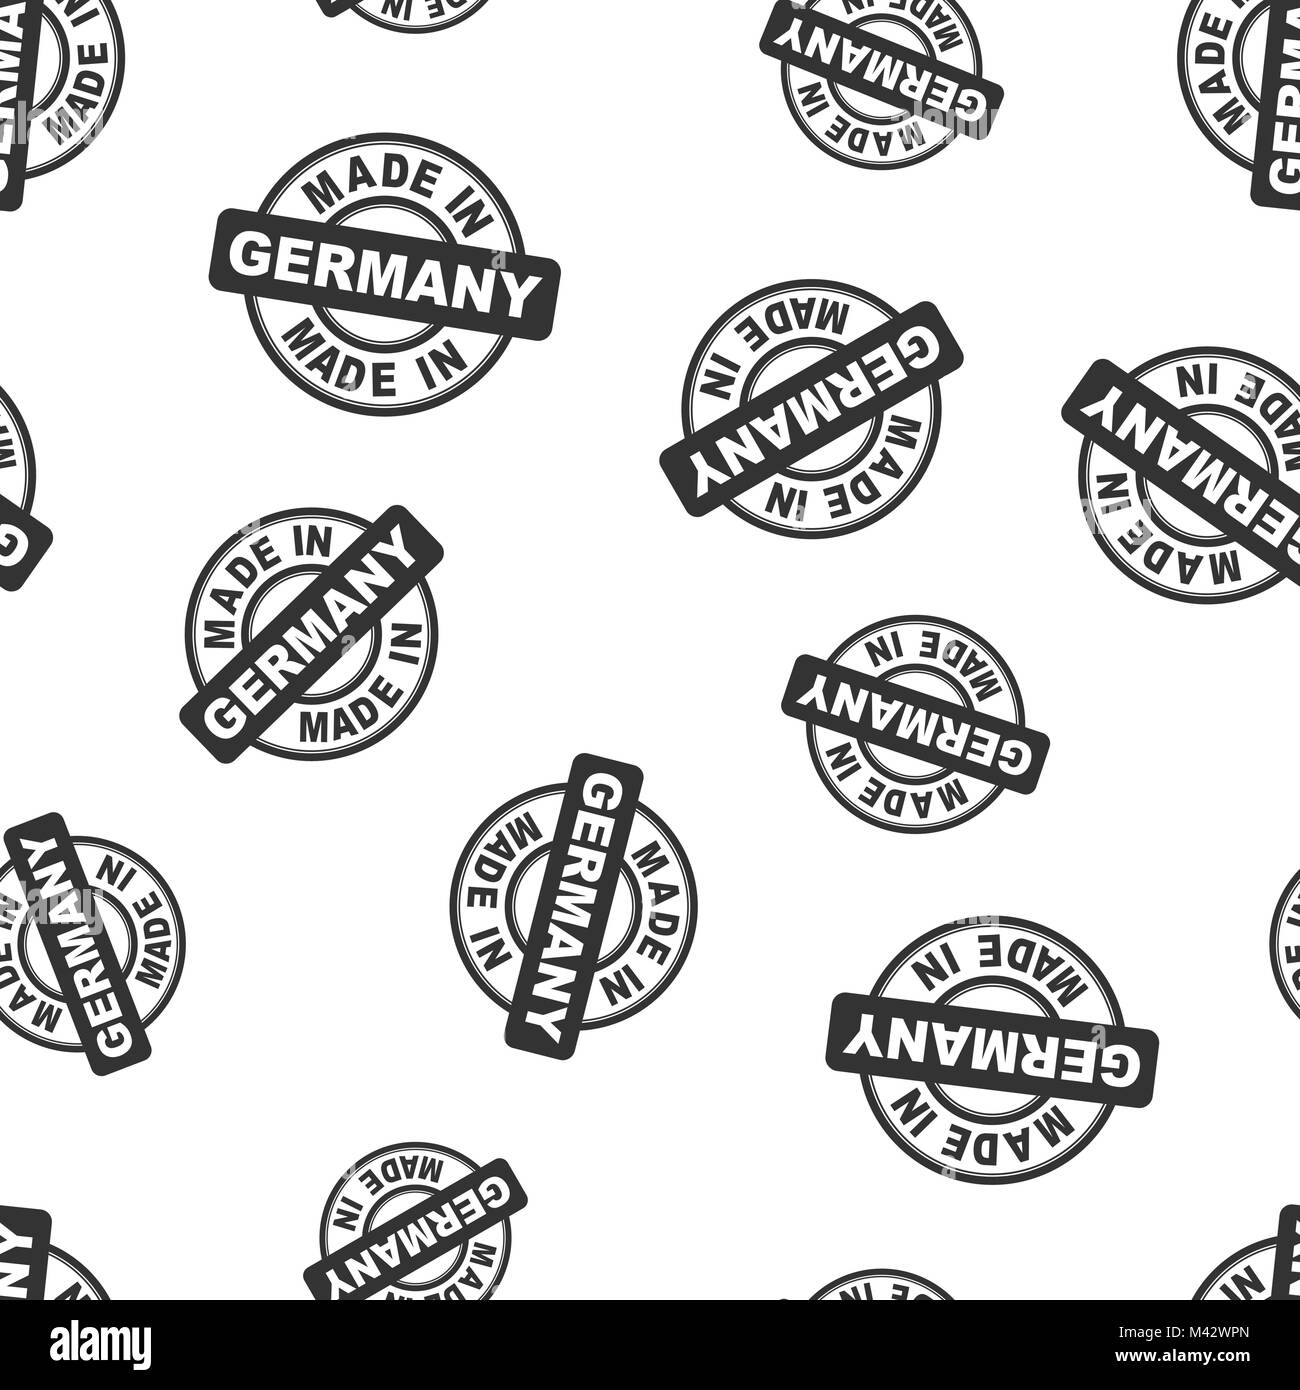 Made in Germany stamp seamless pattern background. Business flat vector illustration. Manufactured in Germany symbol pattern. Stock Vector